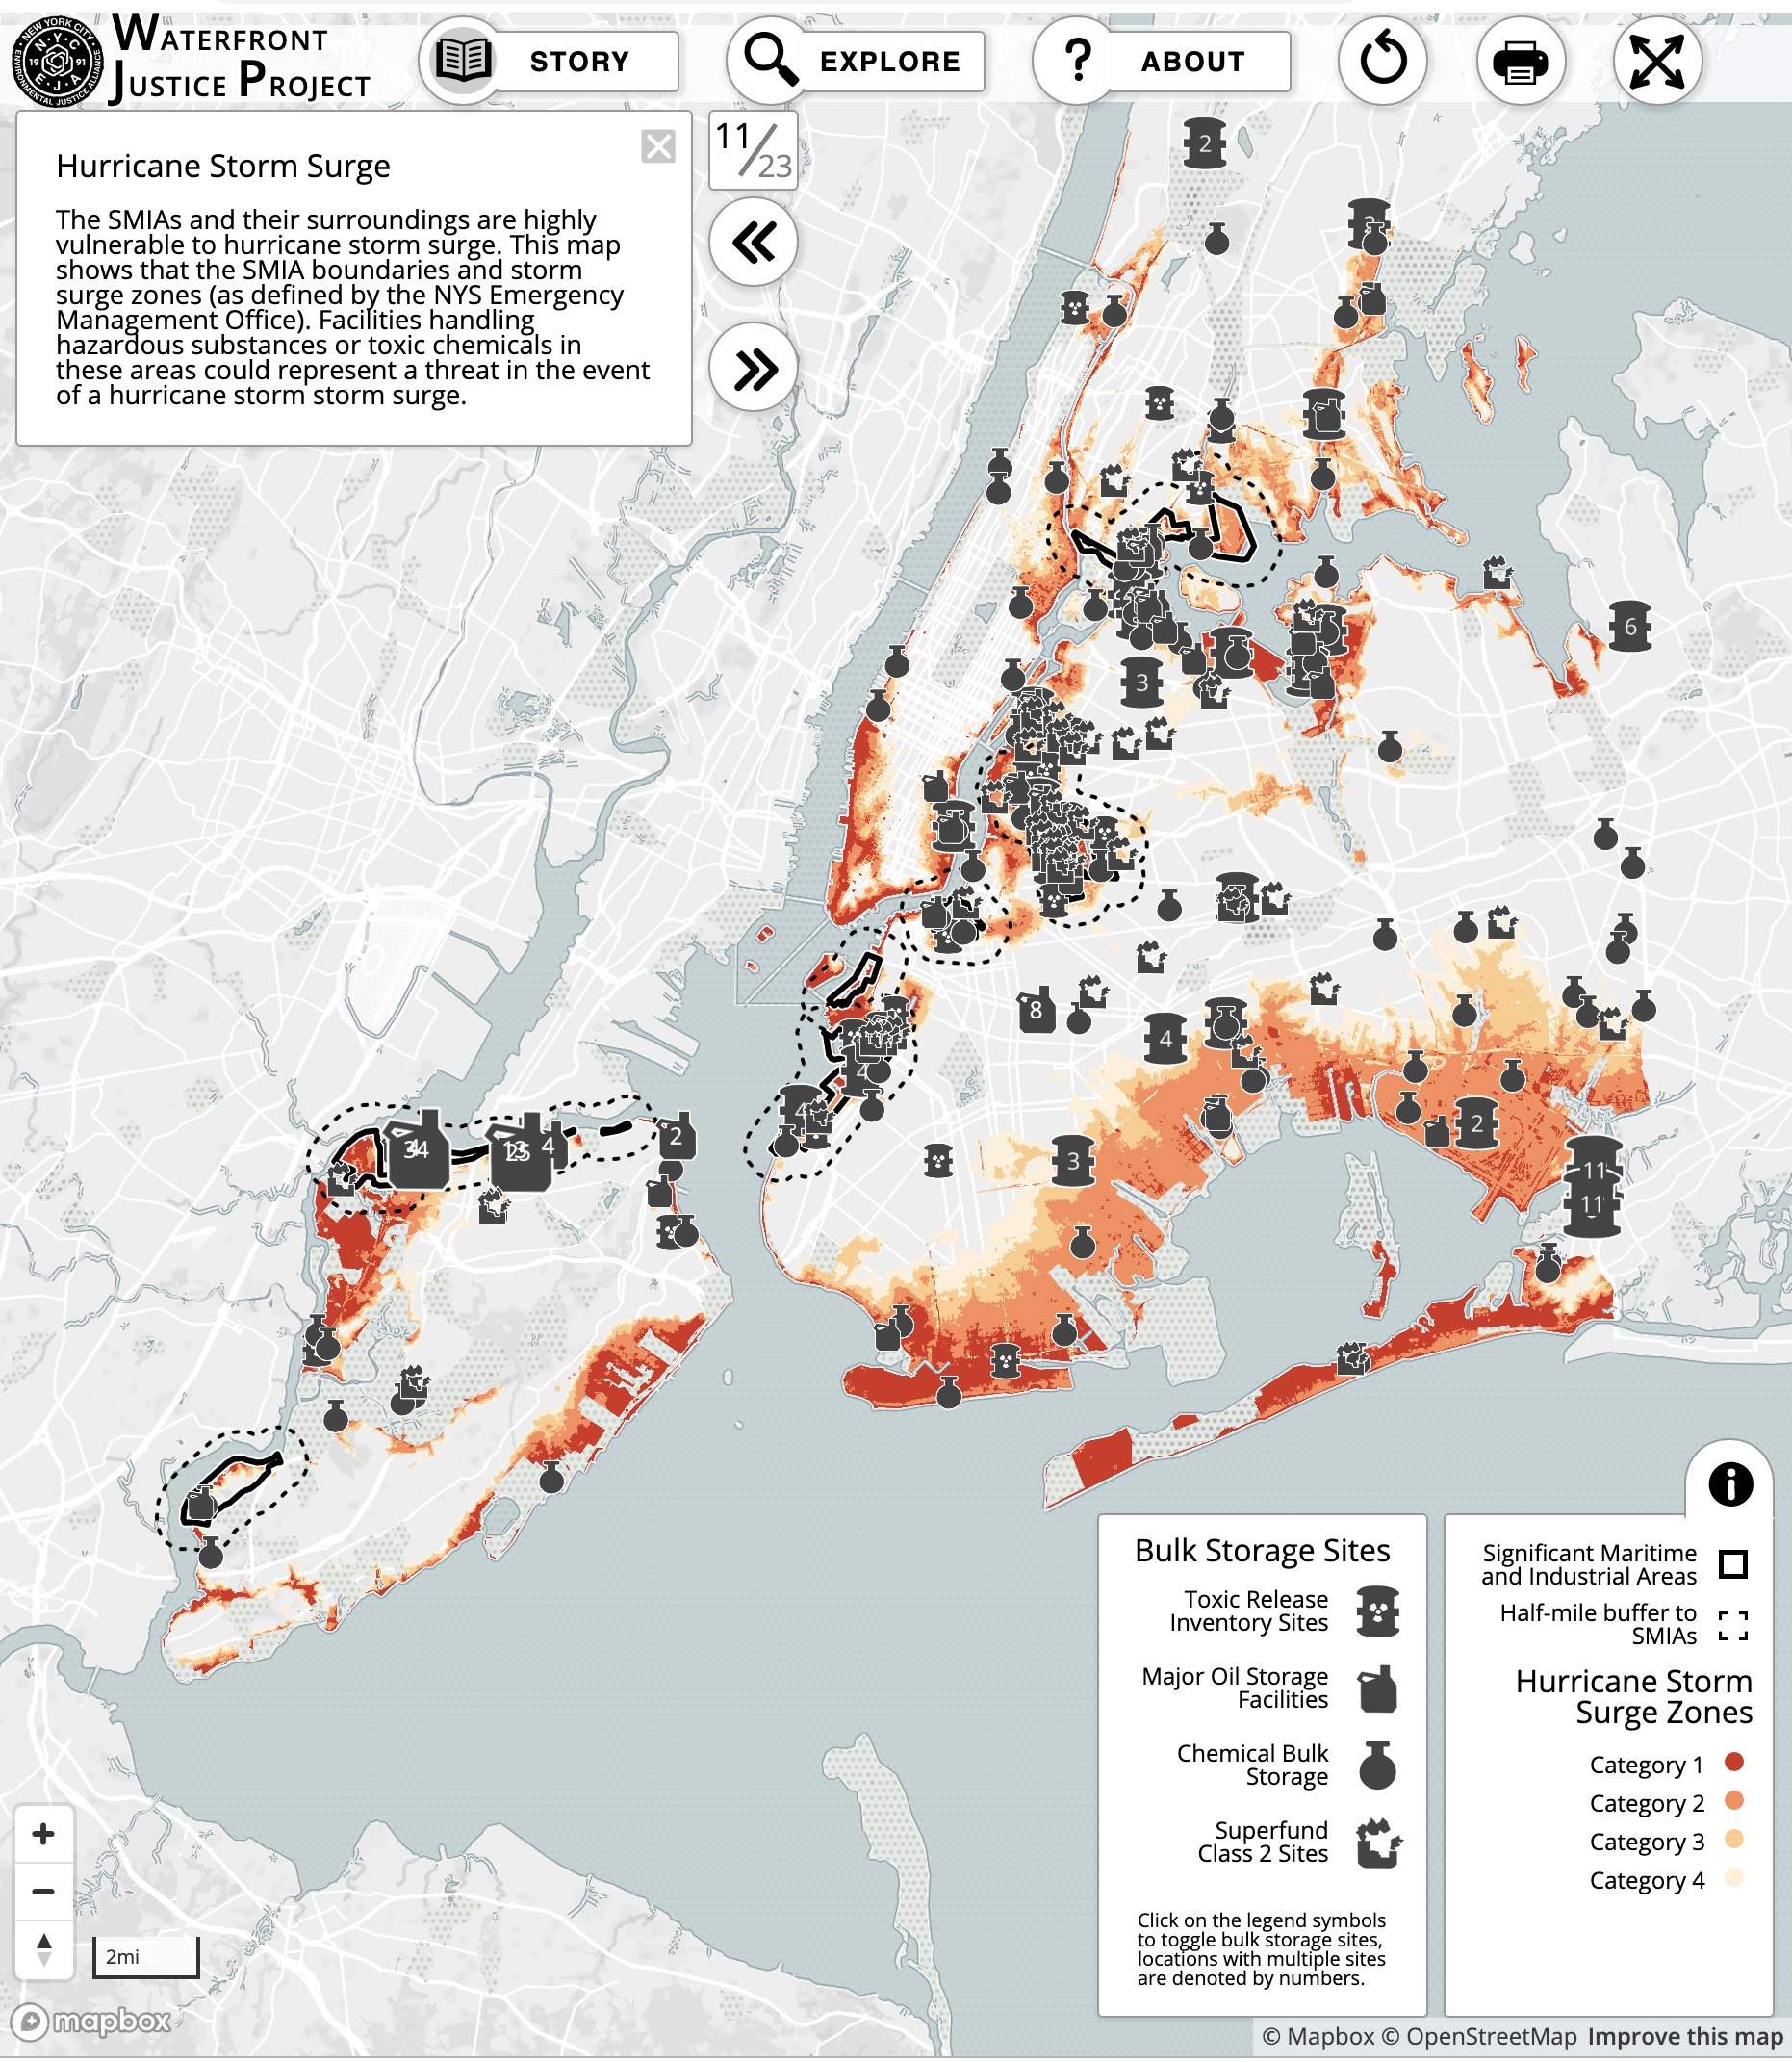 Waterfront Justice Project Interactive Map